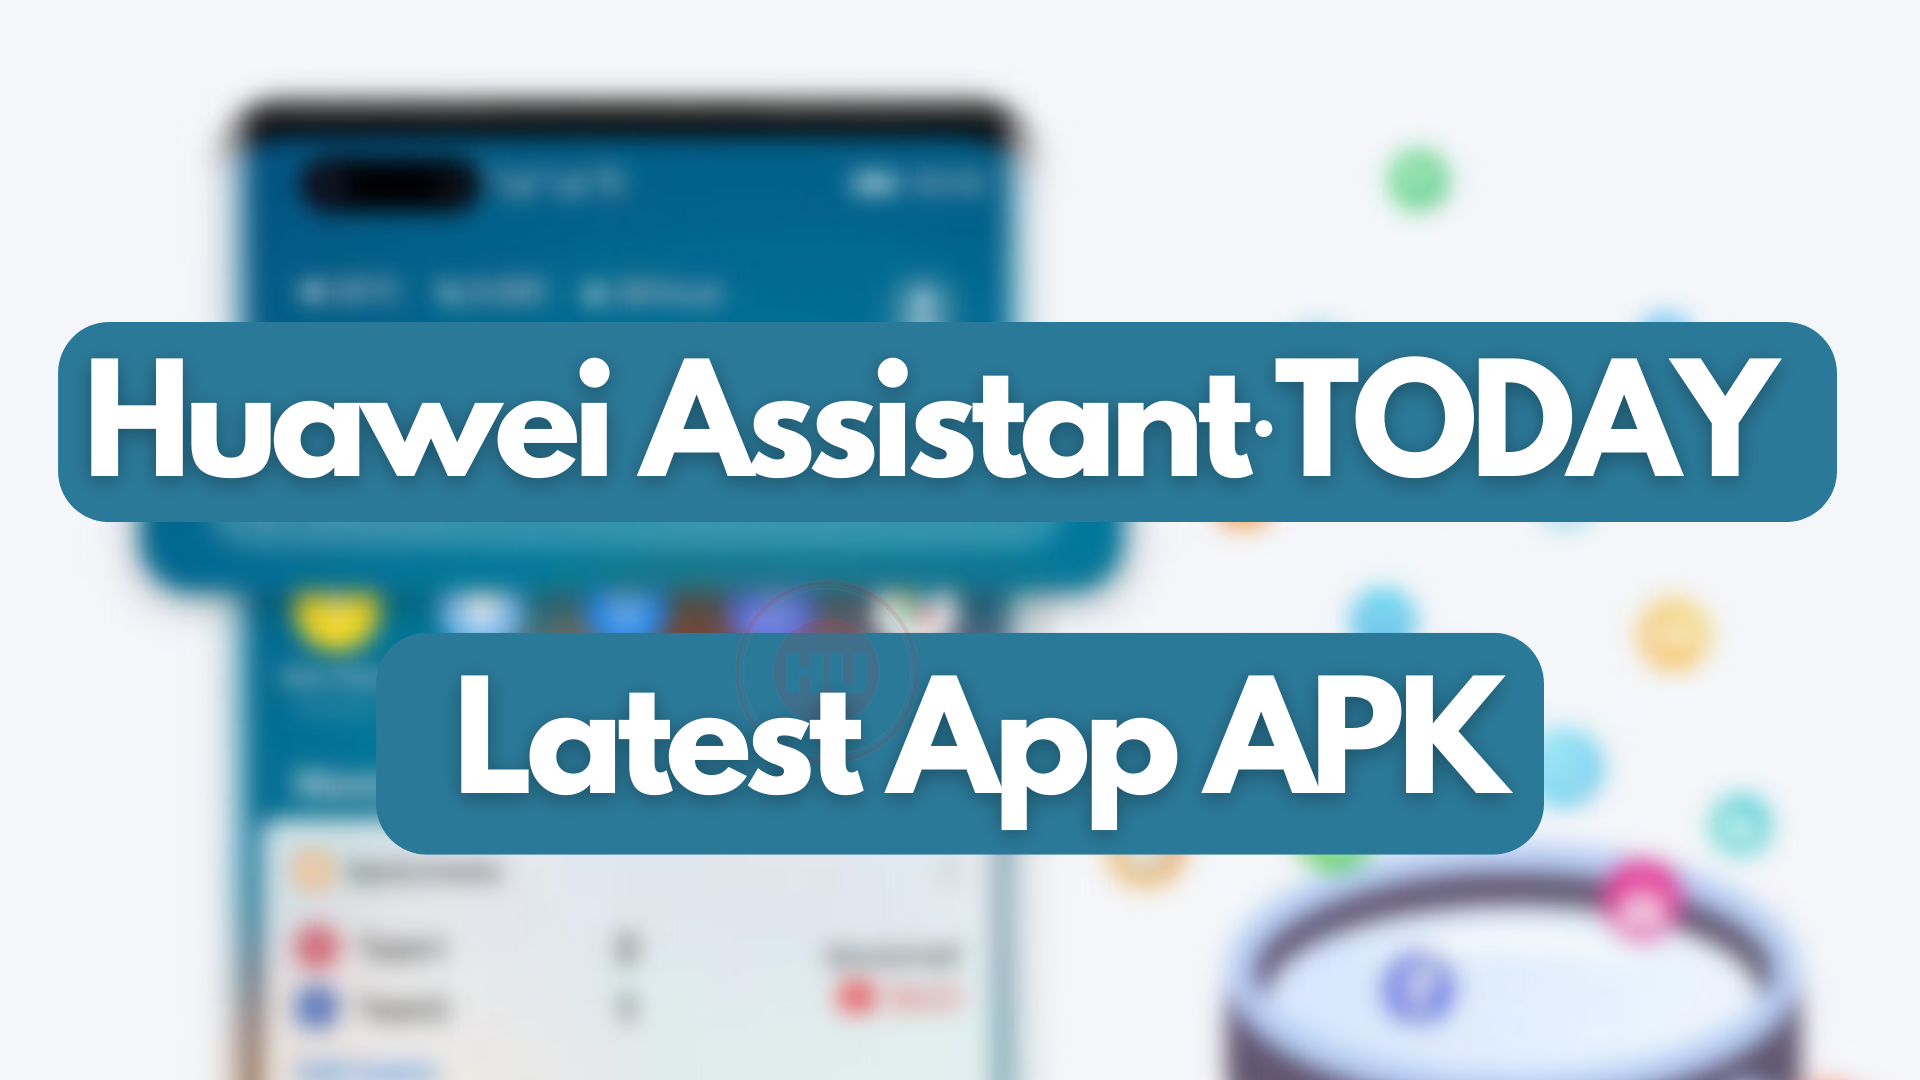 Huawei Assistant∙TODAY latest Apk